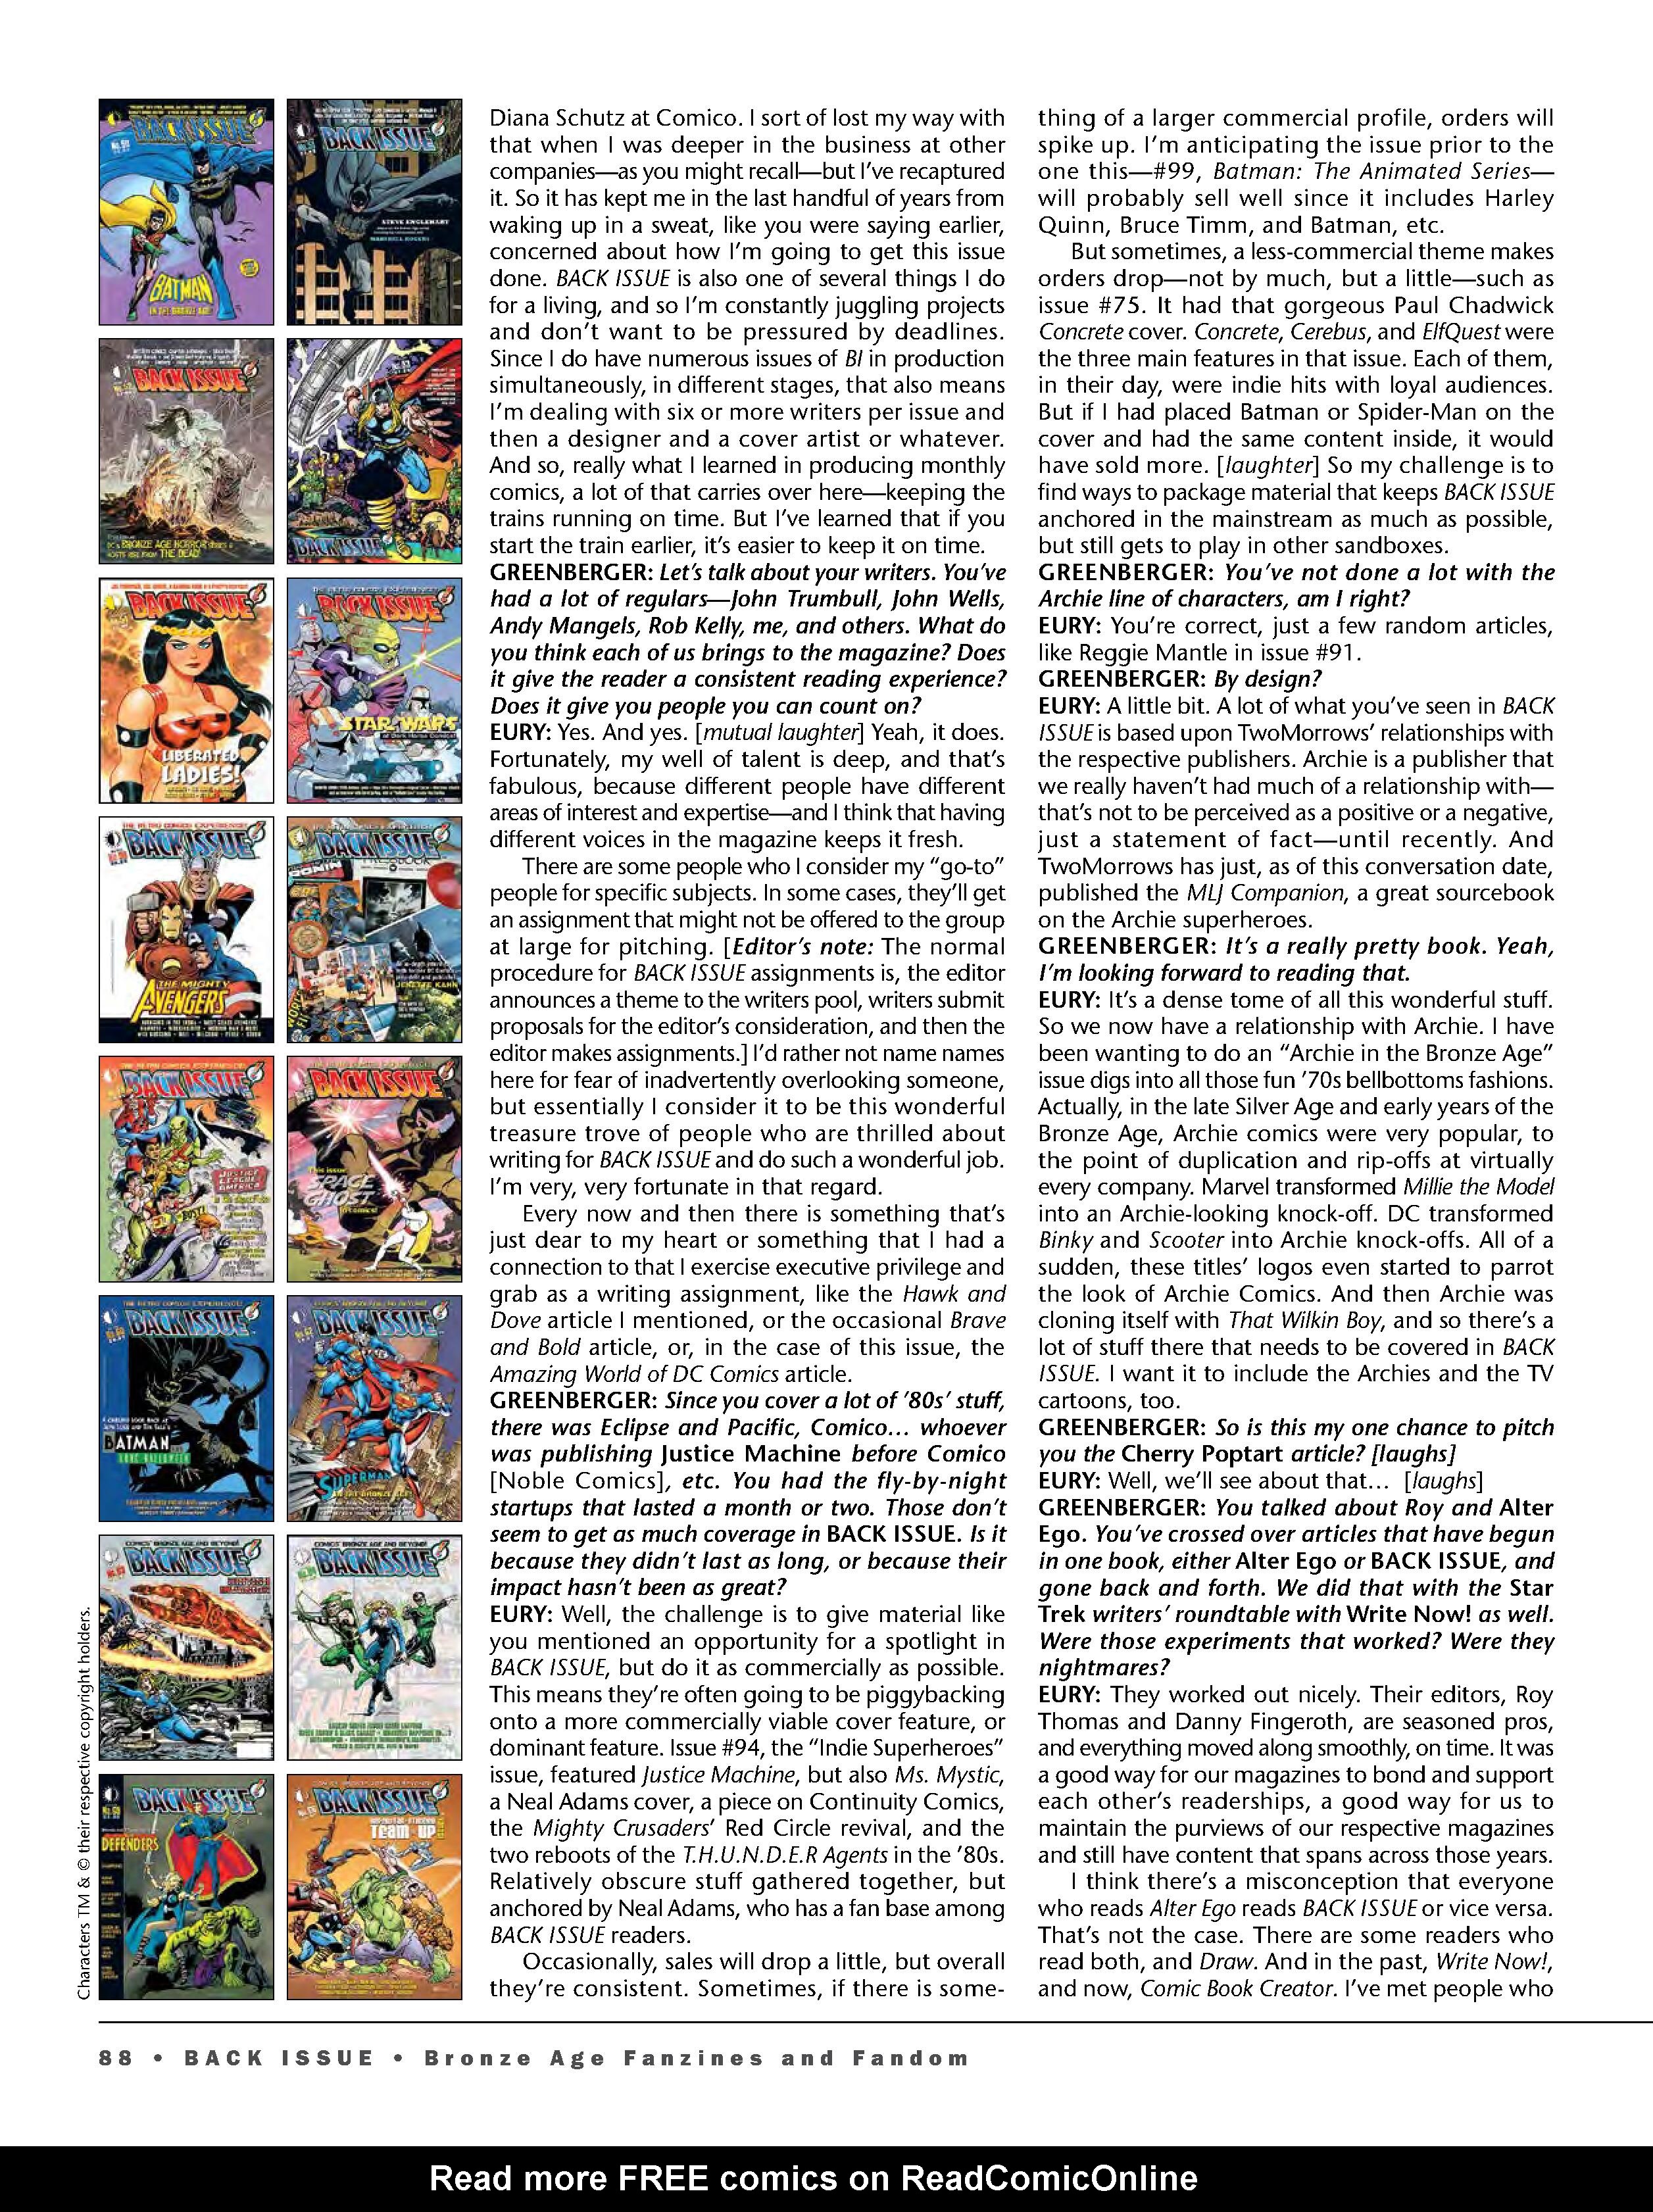 Read online Back Issue comic -  Issue #100 - 90